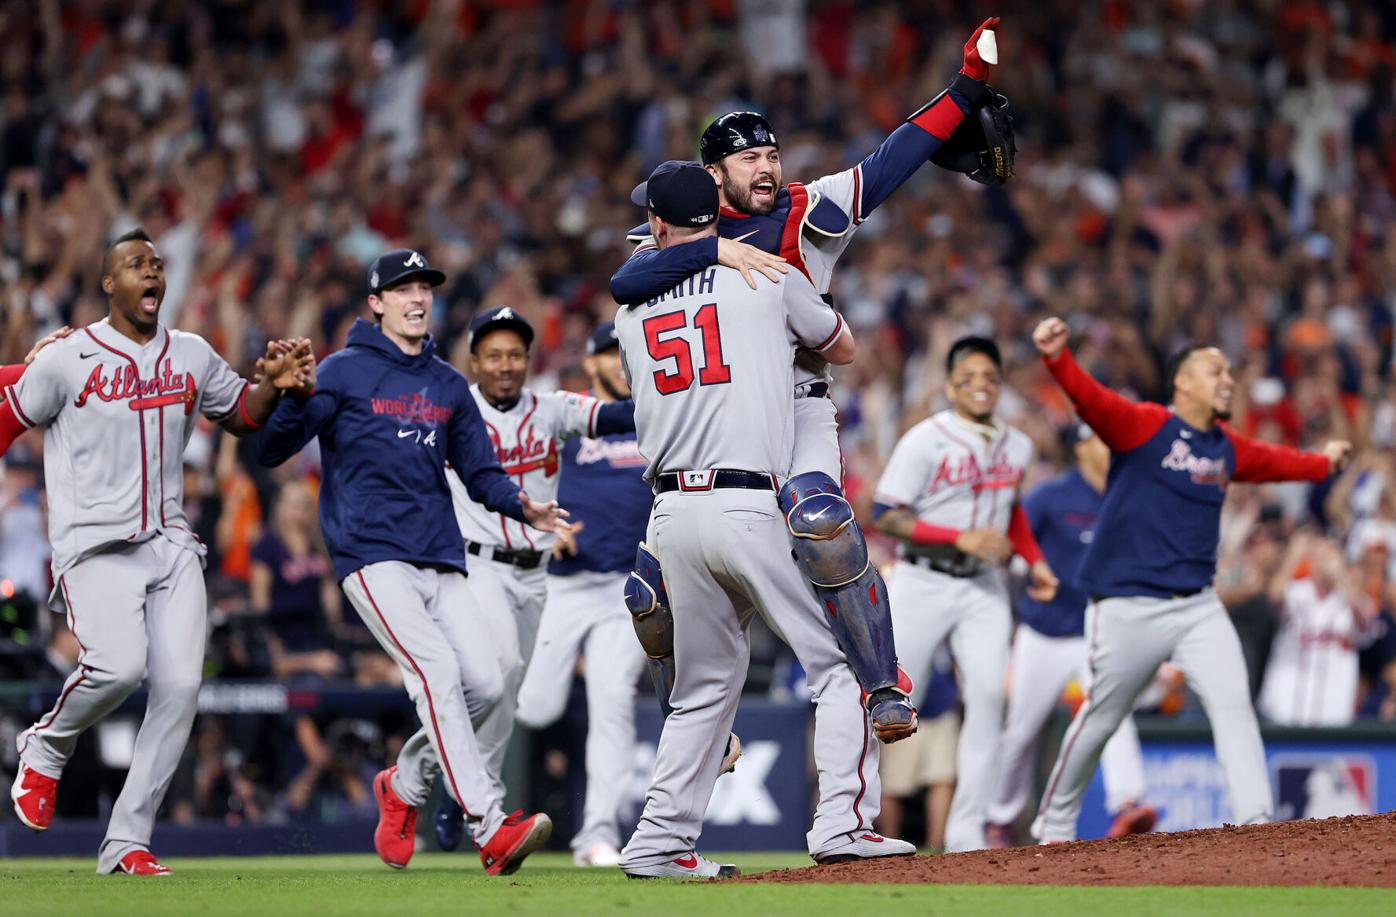 Braves win World Series for first time since 1995 by hammering